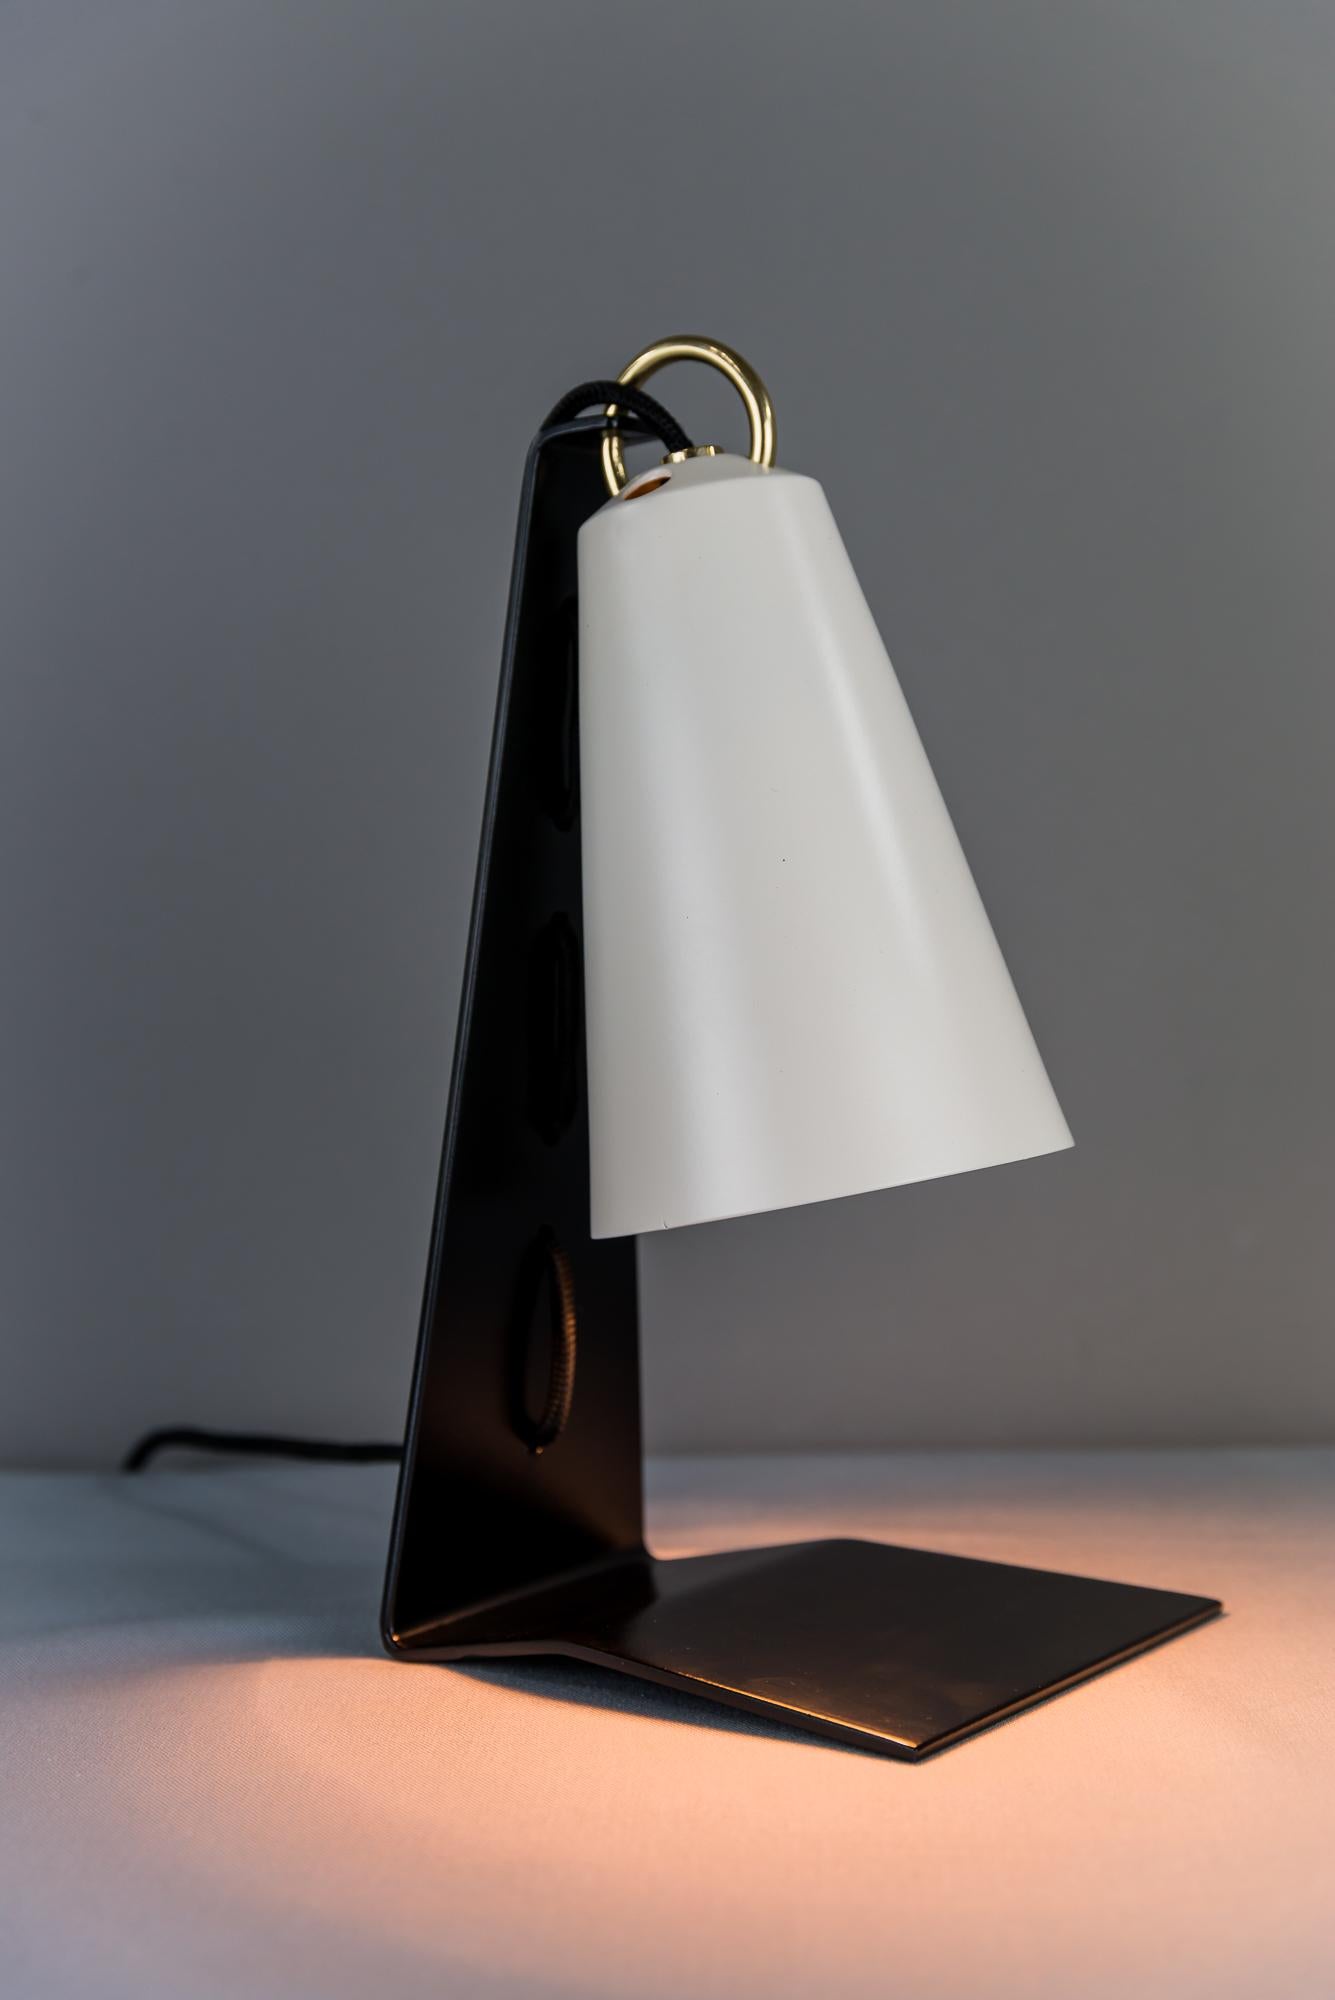 Black and White Austrian Modernist Metall Table Lamp Hook by J. T. Kalmar 1960s For Sale 2